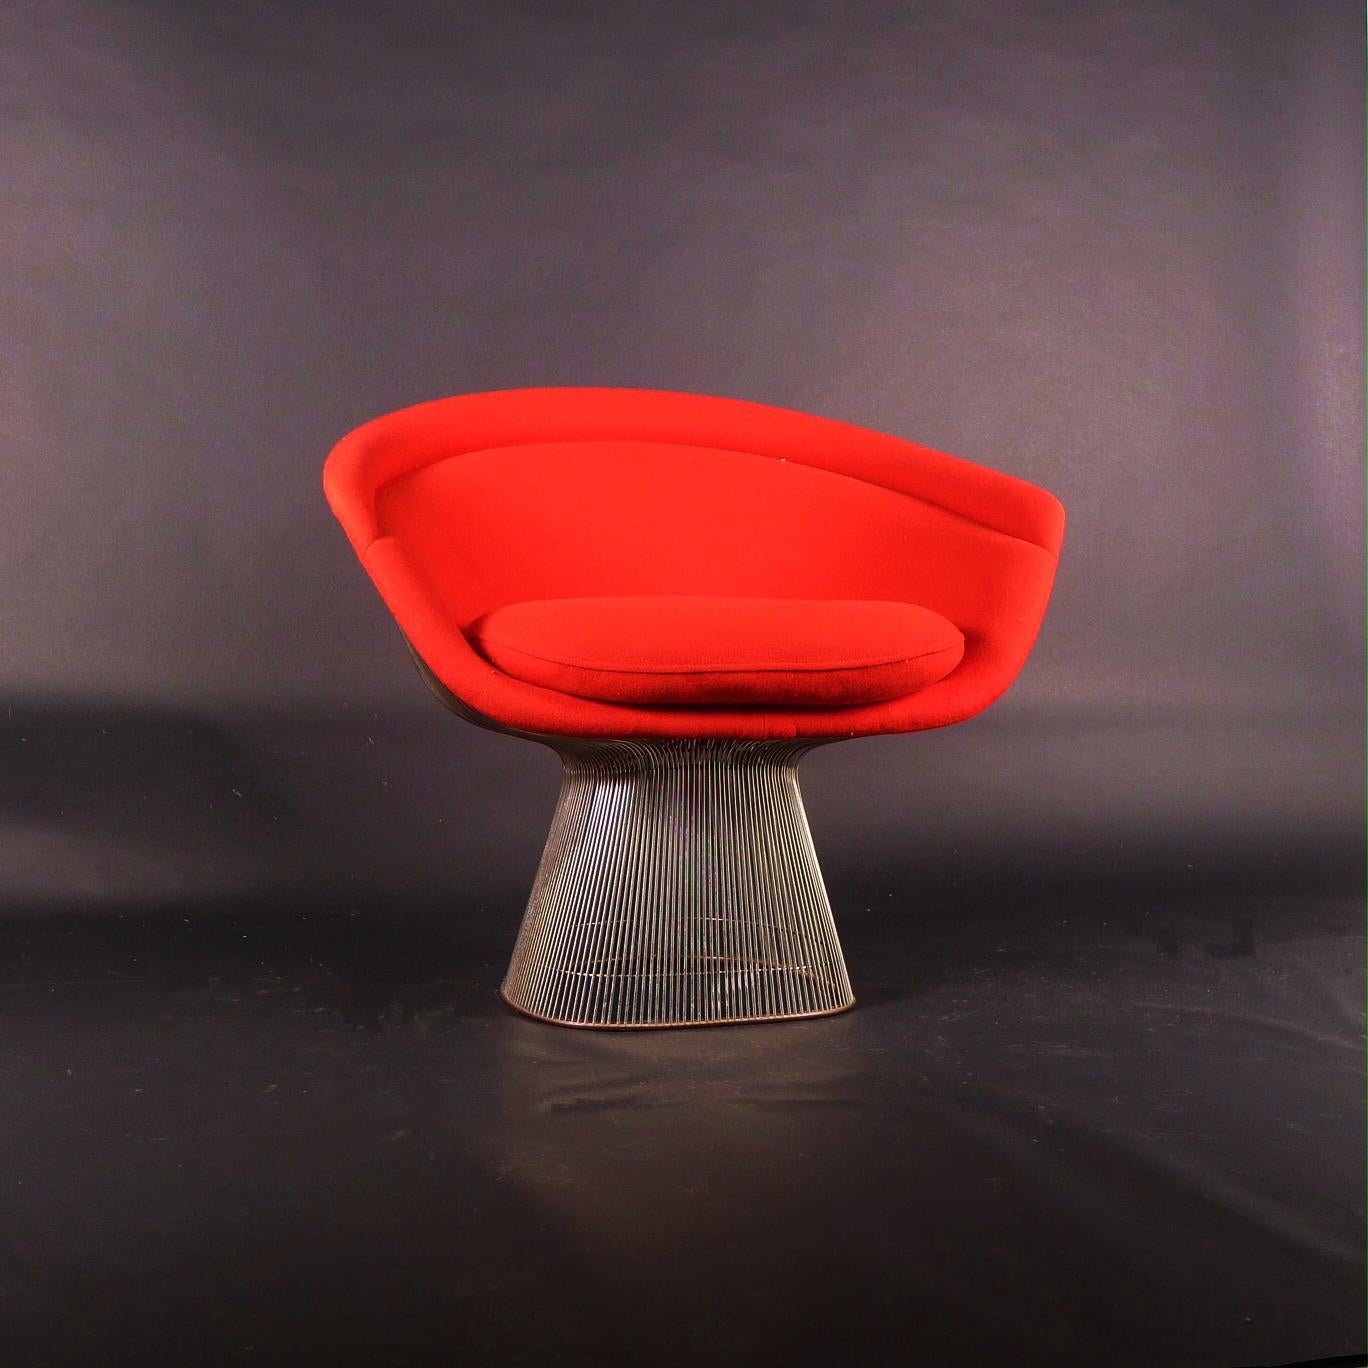 Original 1960s Platner Lounge Chair, designed 1966 by Warren Platner and manufactured by Knoll International.

This iconic chair is made of moulded fibreglass covered in the original padded red upholstery, and supported in a cage of vertical nickel